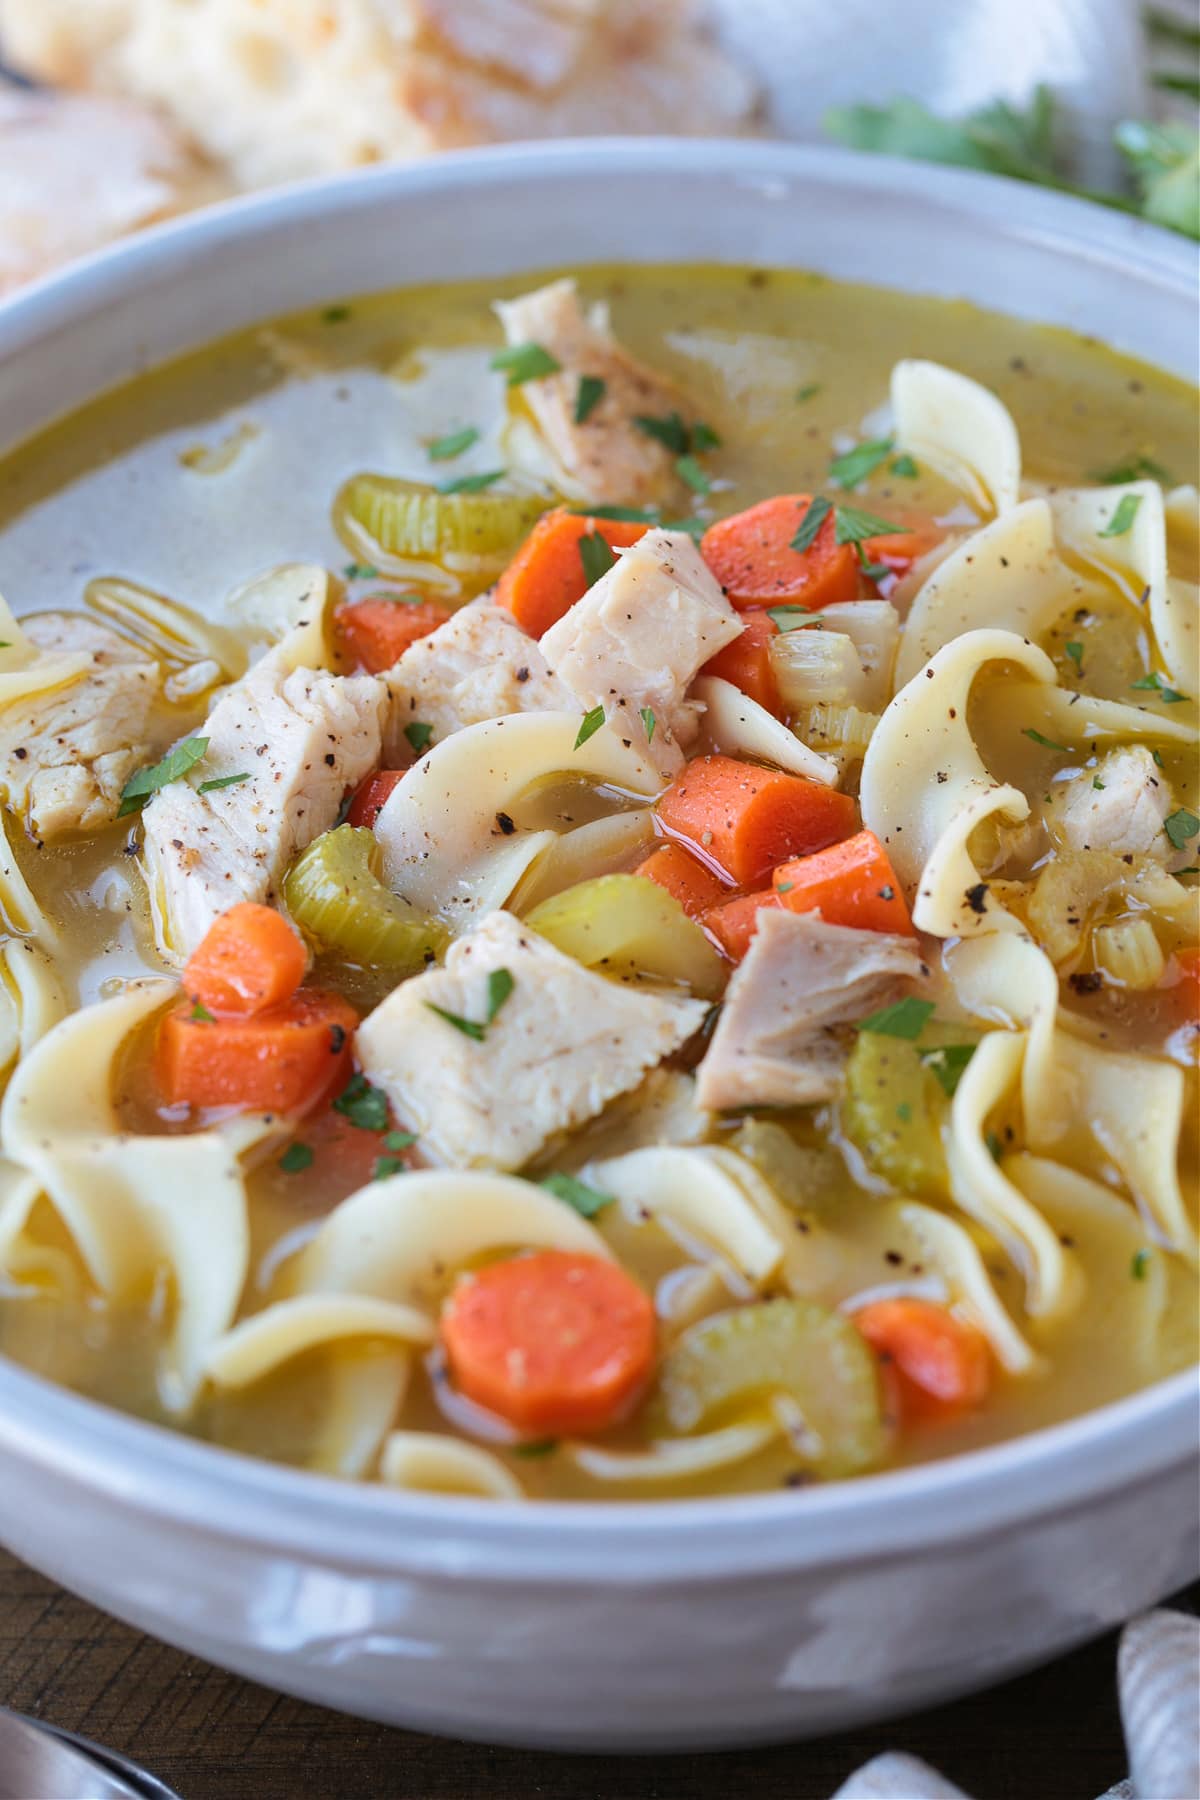 homemade turkey soup in a white bowl from the side